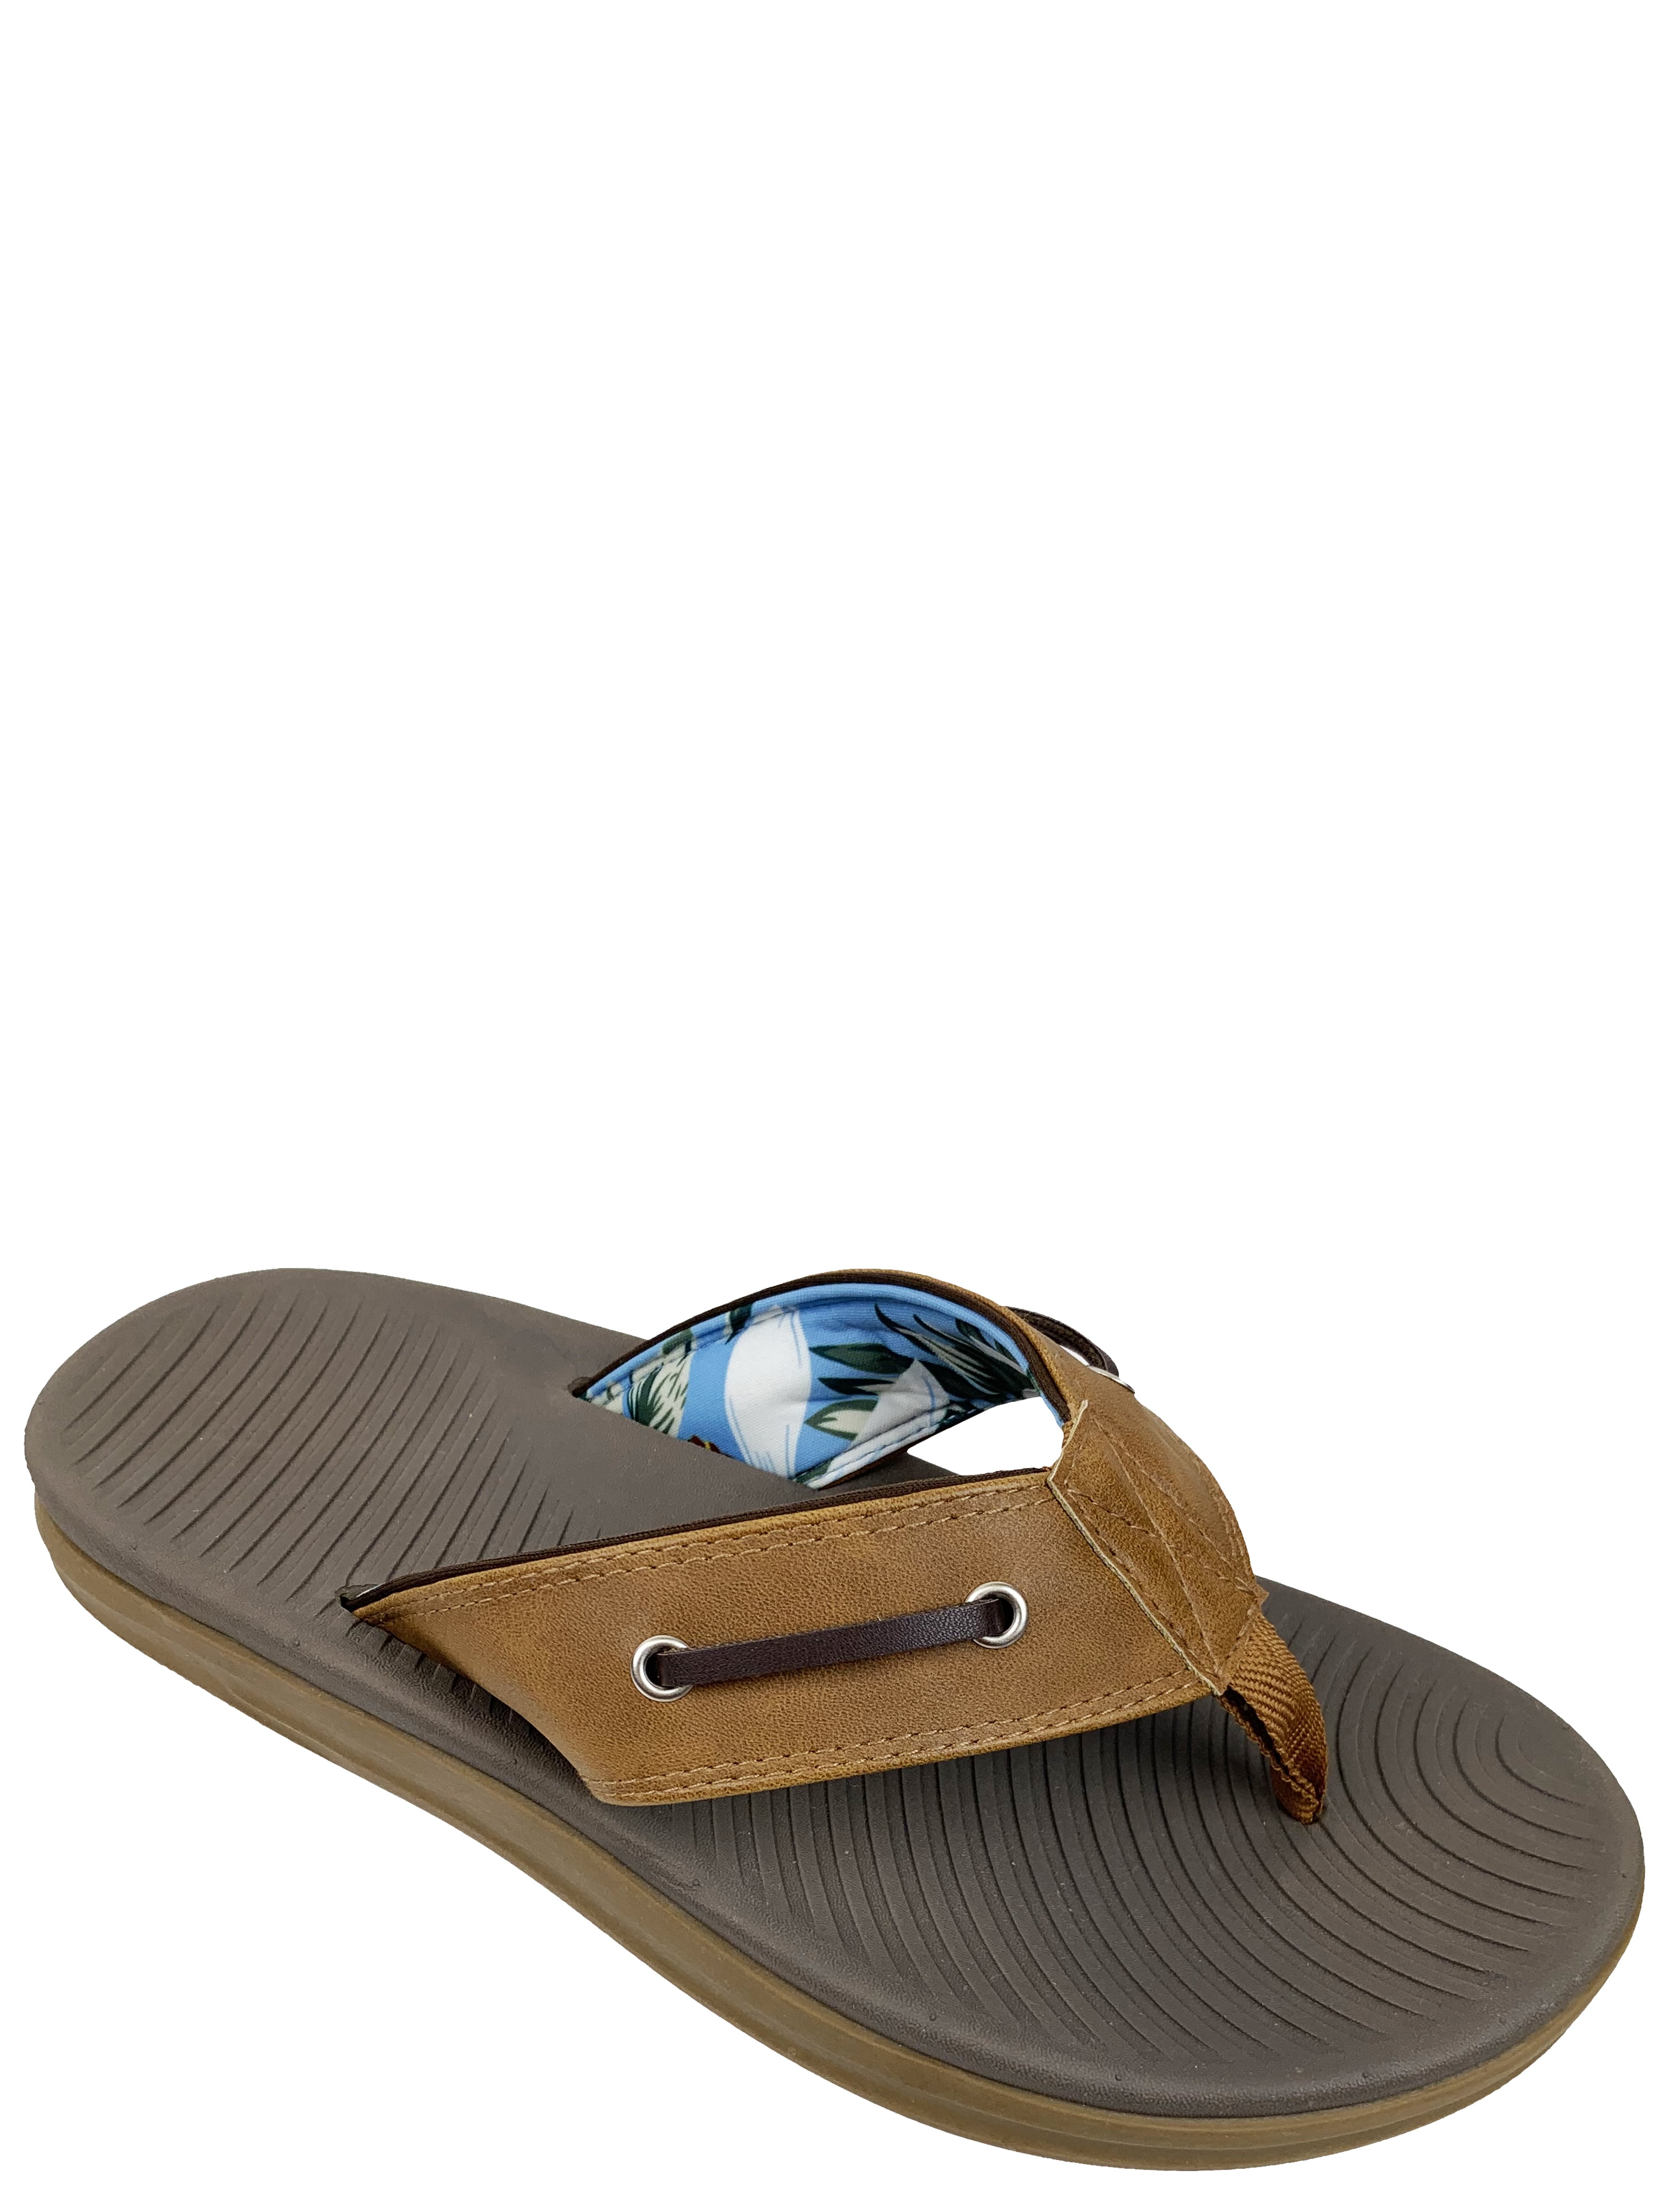 Forthery Mens Beach Shoes Casual Flip Flops Light Weight Thong Sandals Couple Shoes